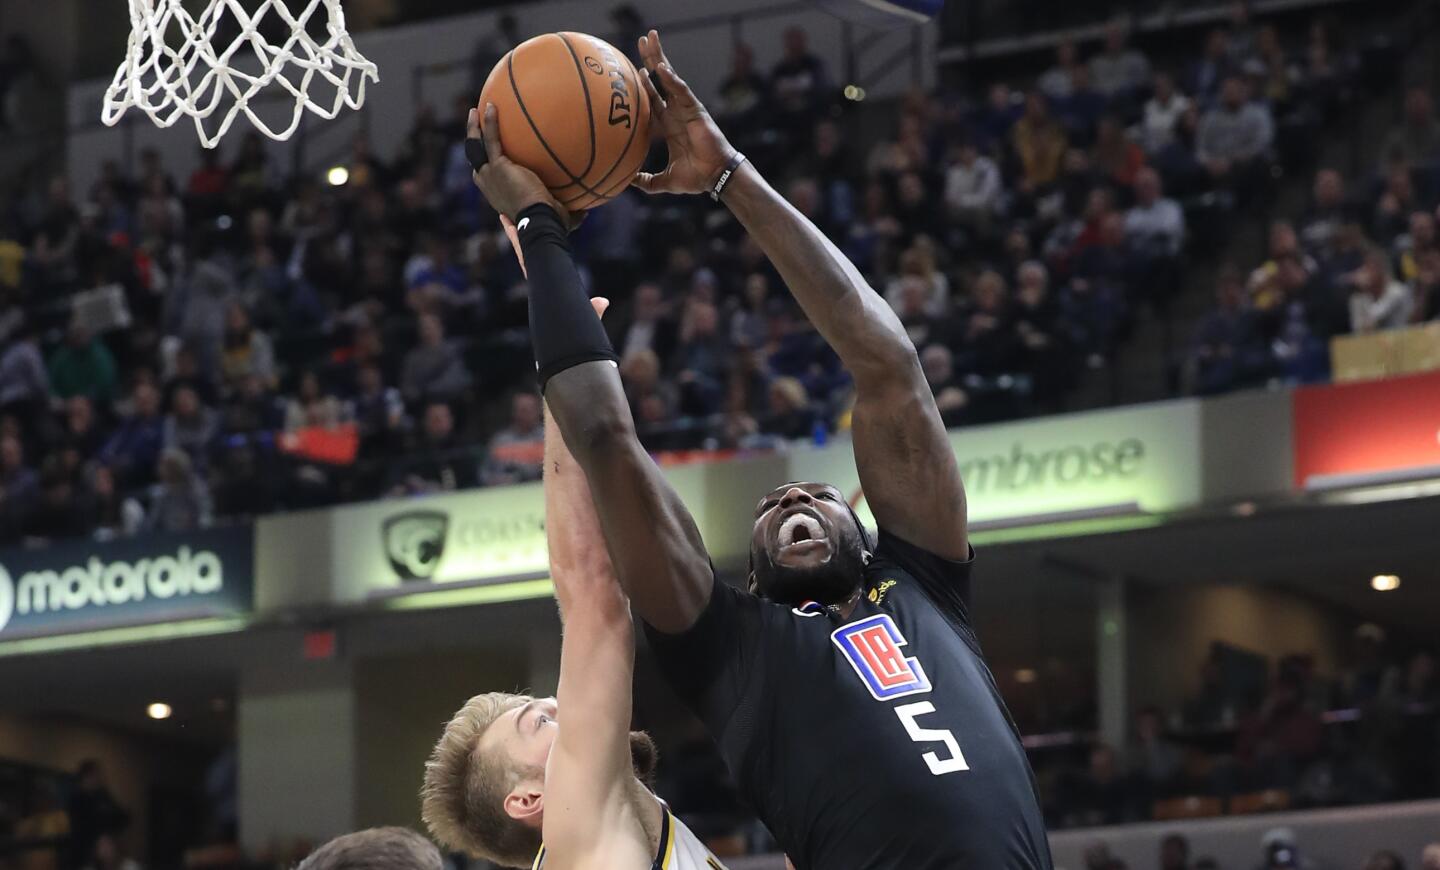 Montrezl Harrell puts up a shot during a game against the Pacers on Dec. 9 at Bankers Life Fieldhouse.